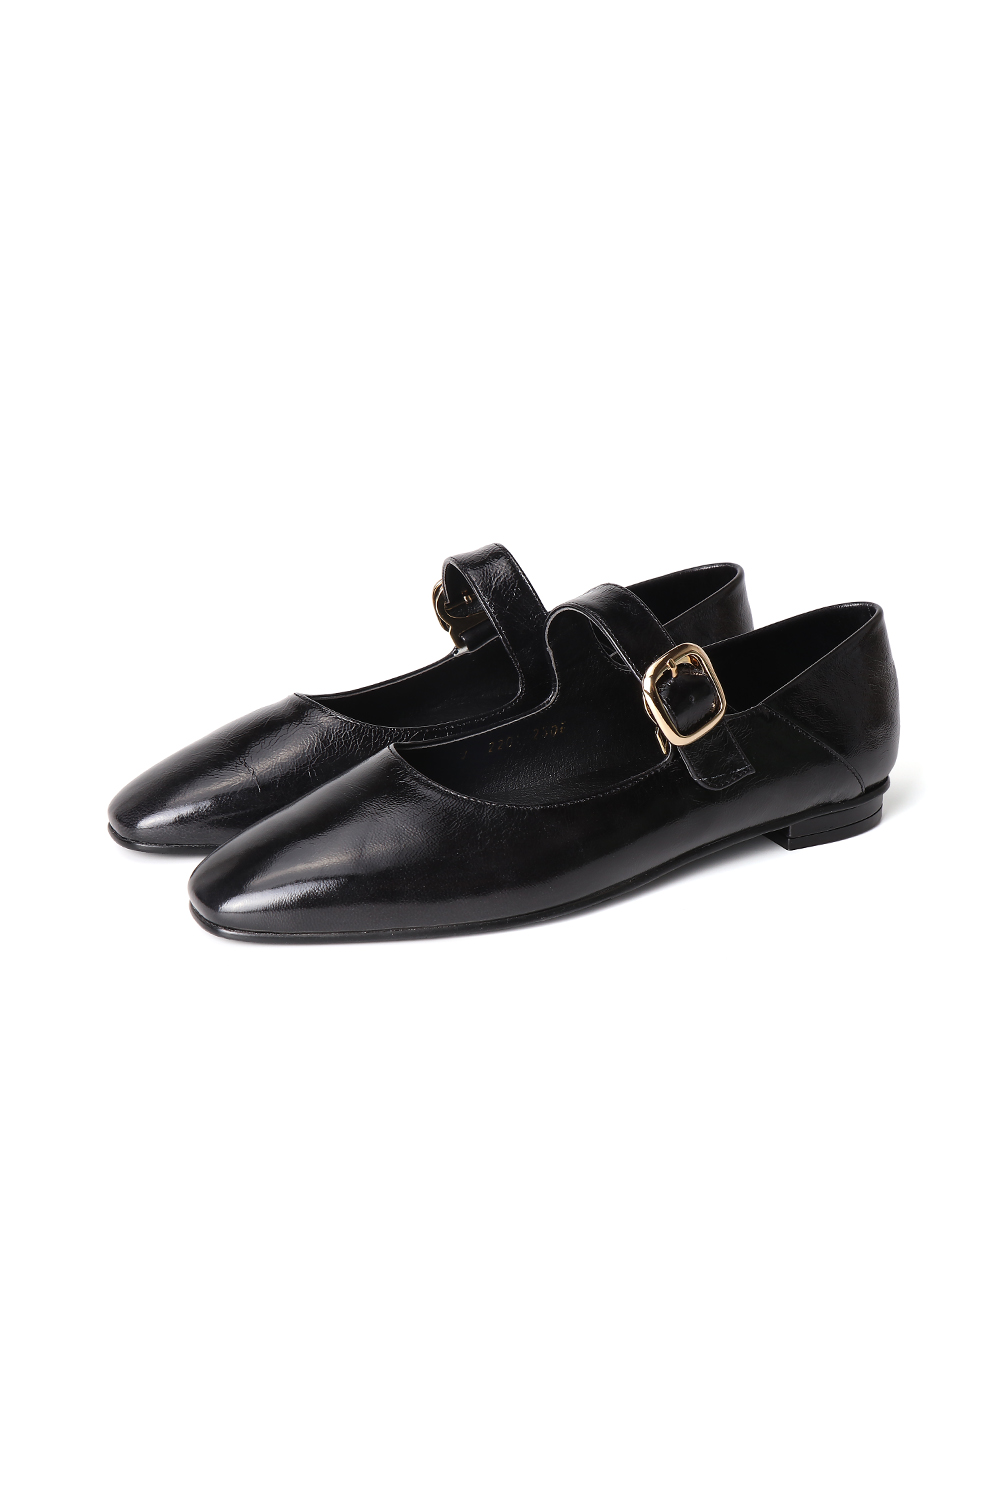 ANNE GOLD BUCKLE MARY JANE SHOES [BLACK]